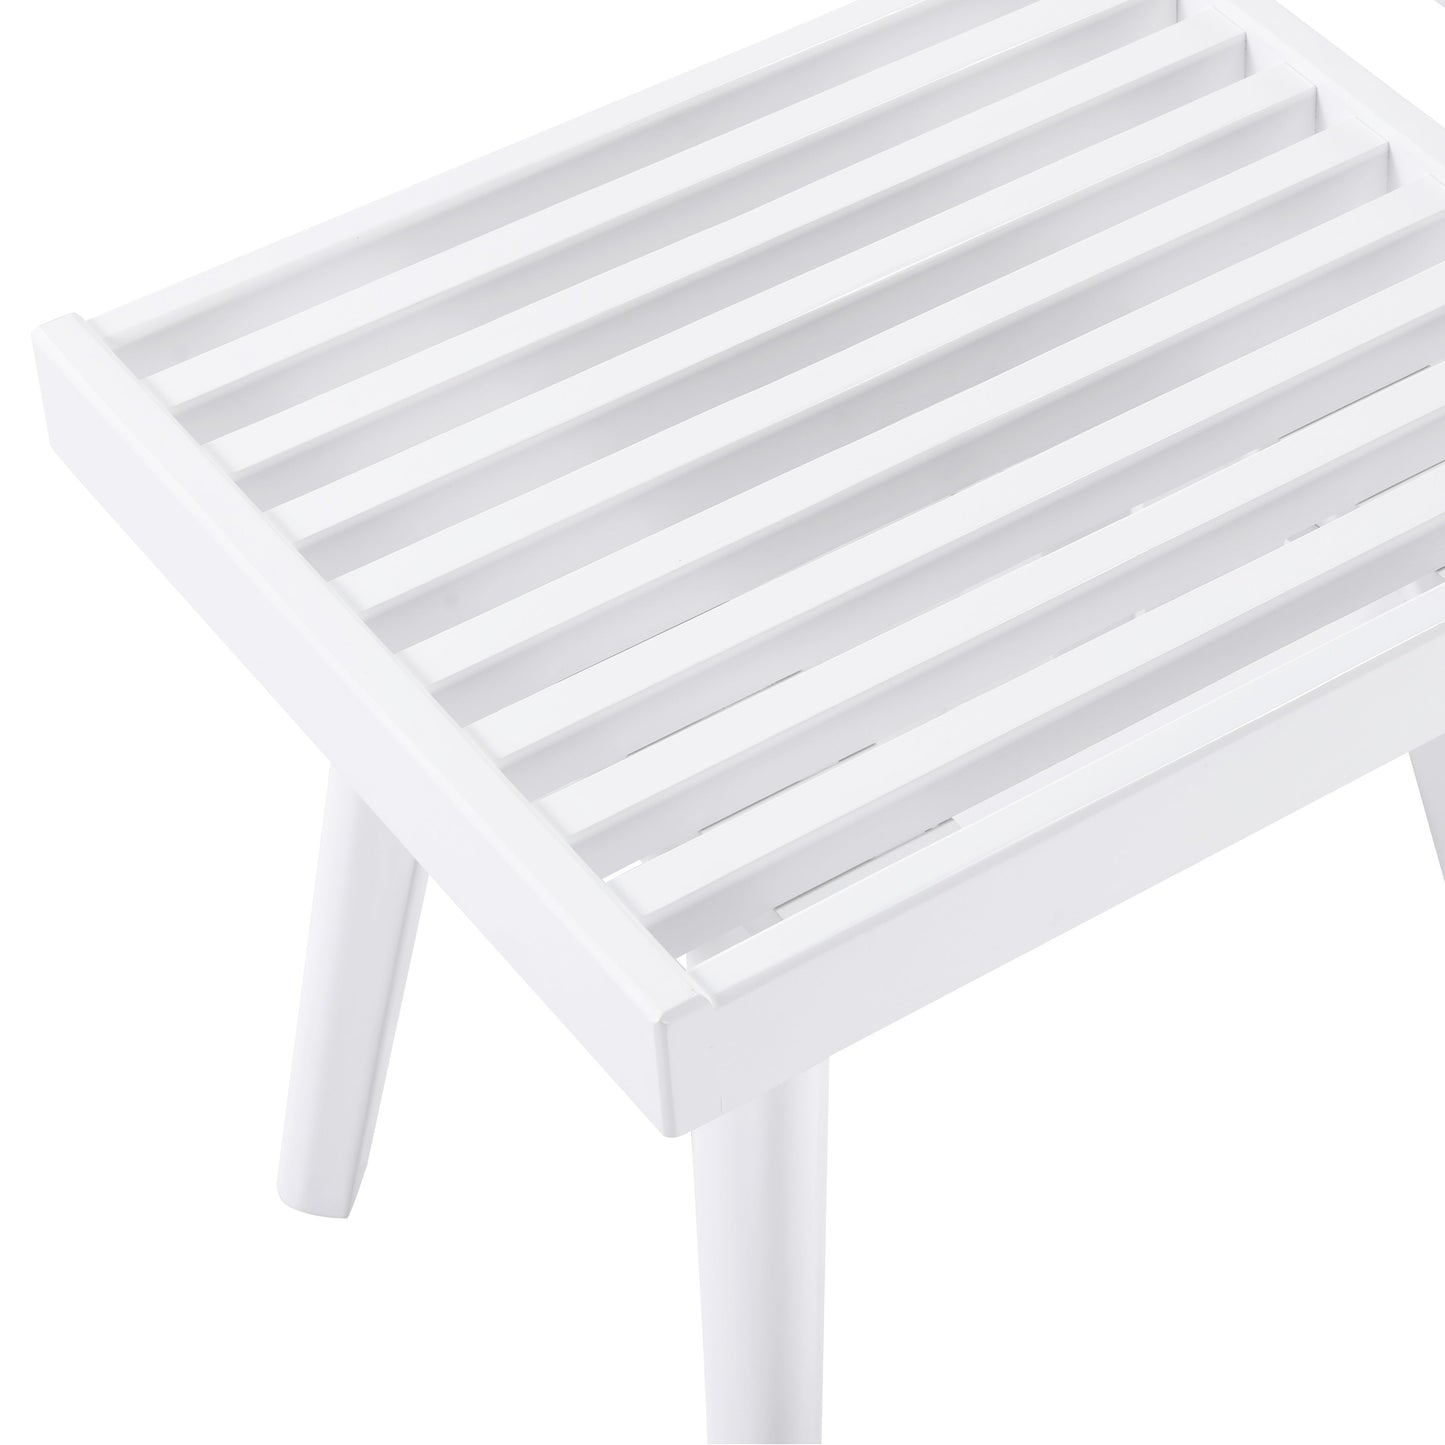 Larwich Solid Wood Slatted Bench, 19-Inch Long, White